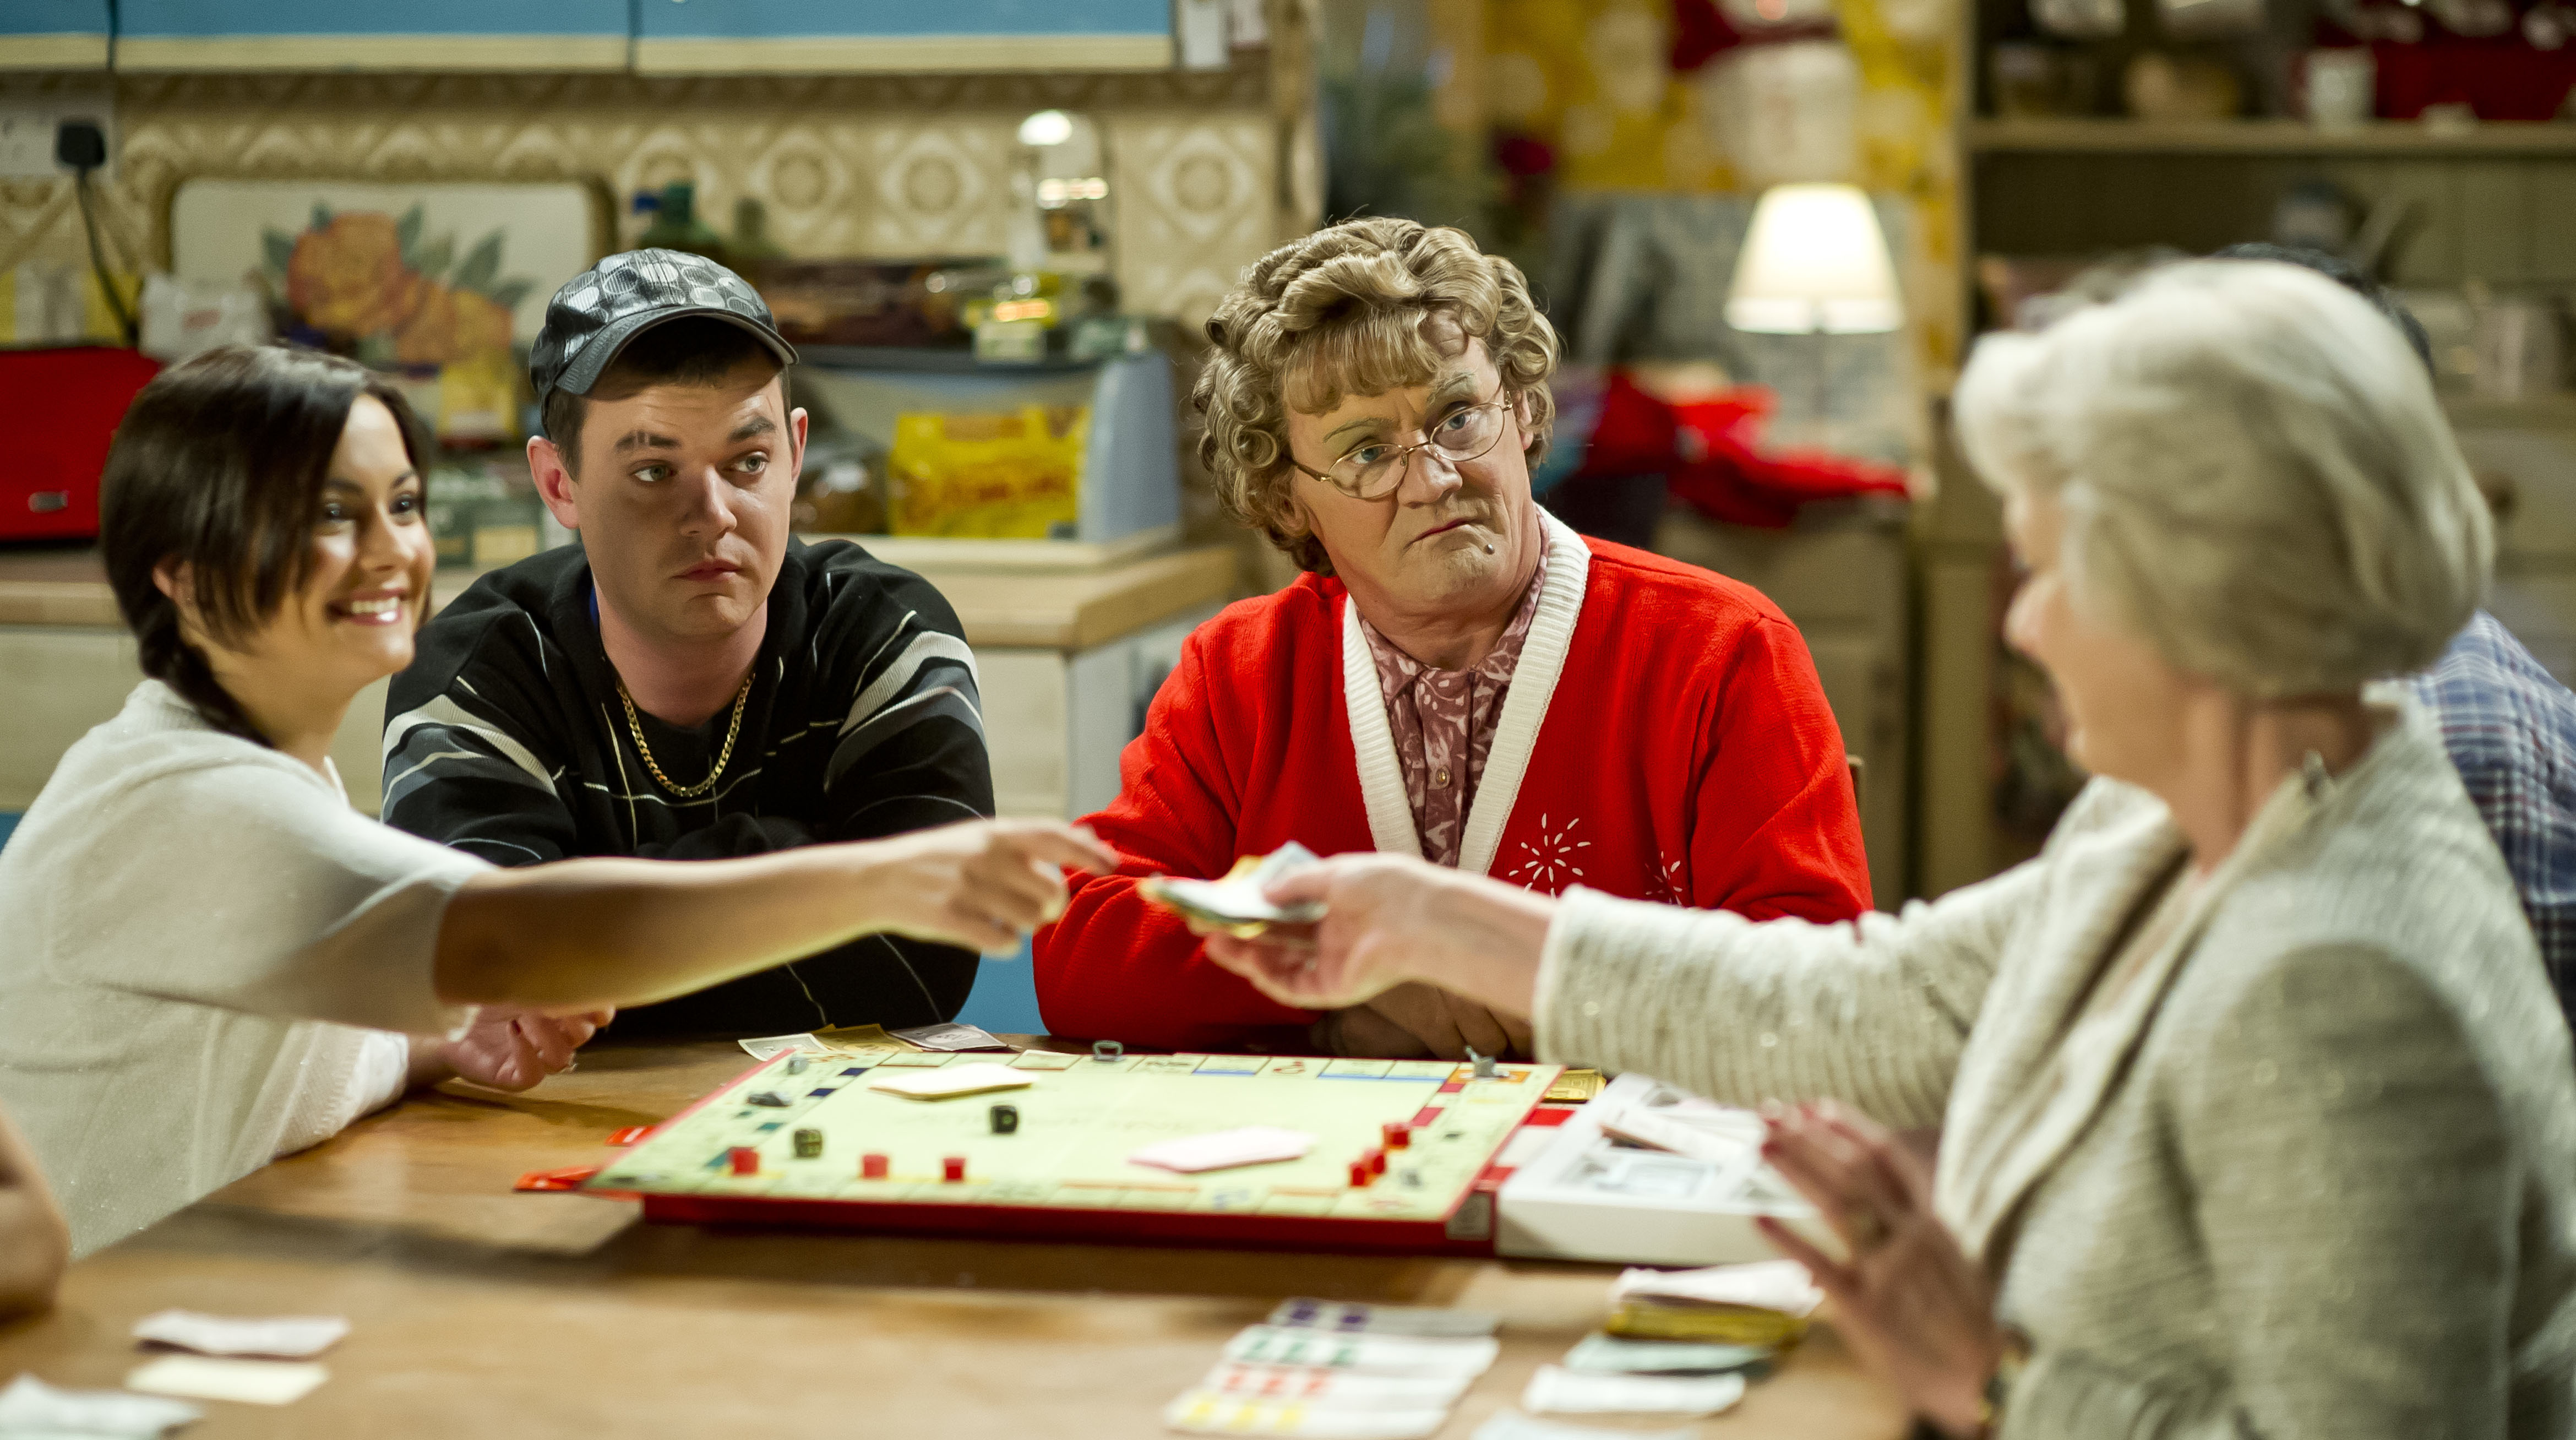 We finally know when Mrs Brown’s Boys is returning with a new series ...